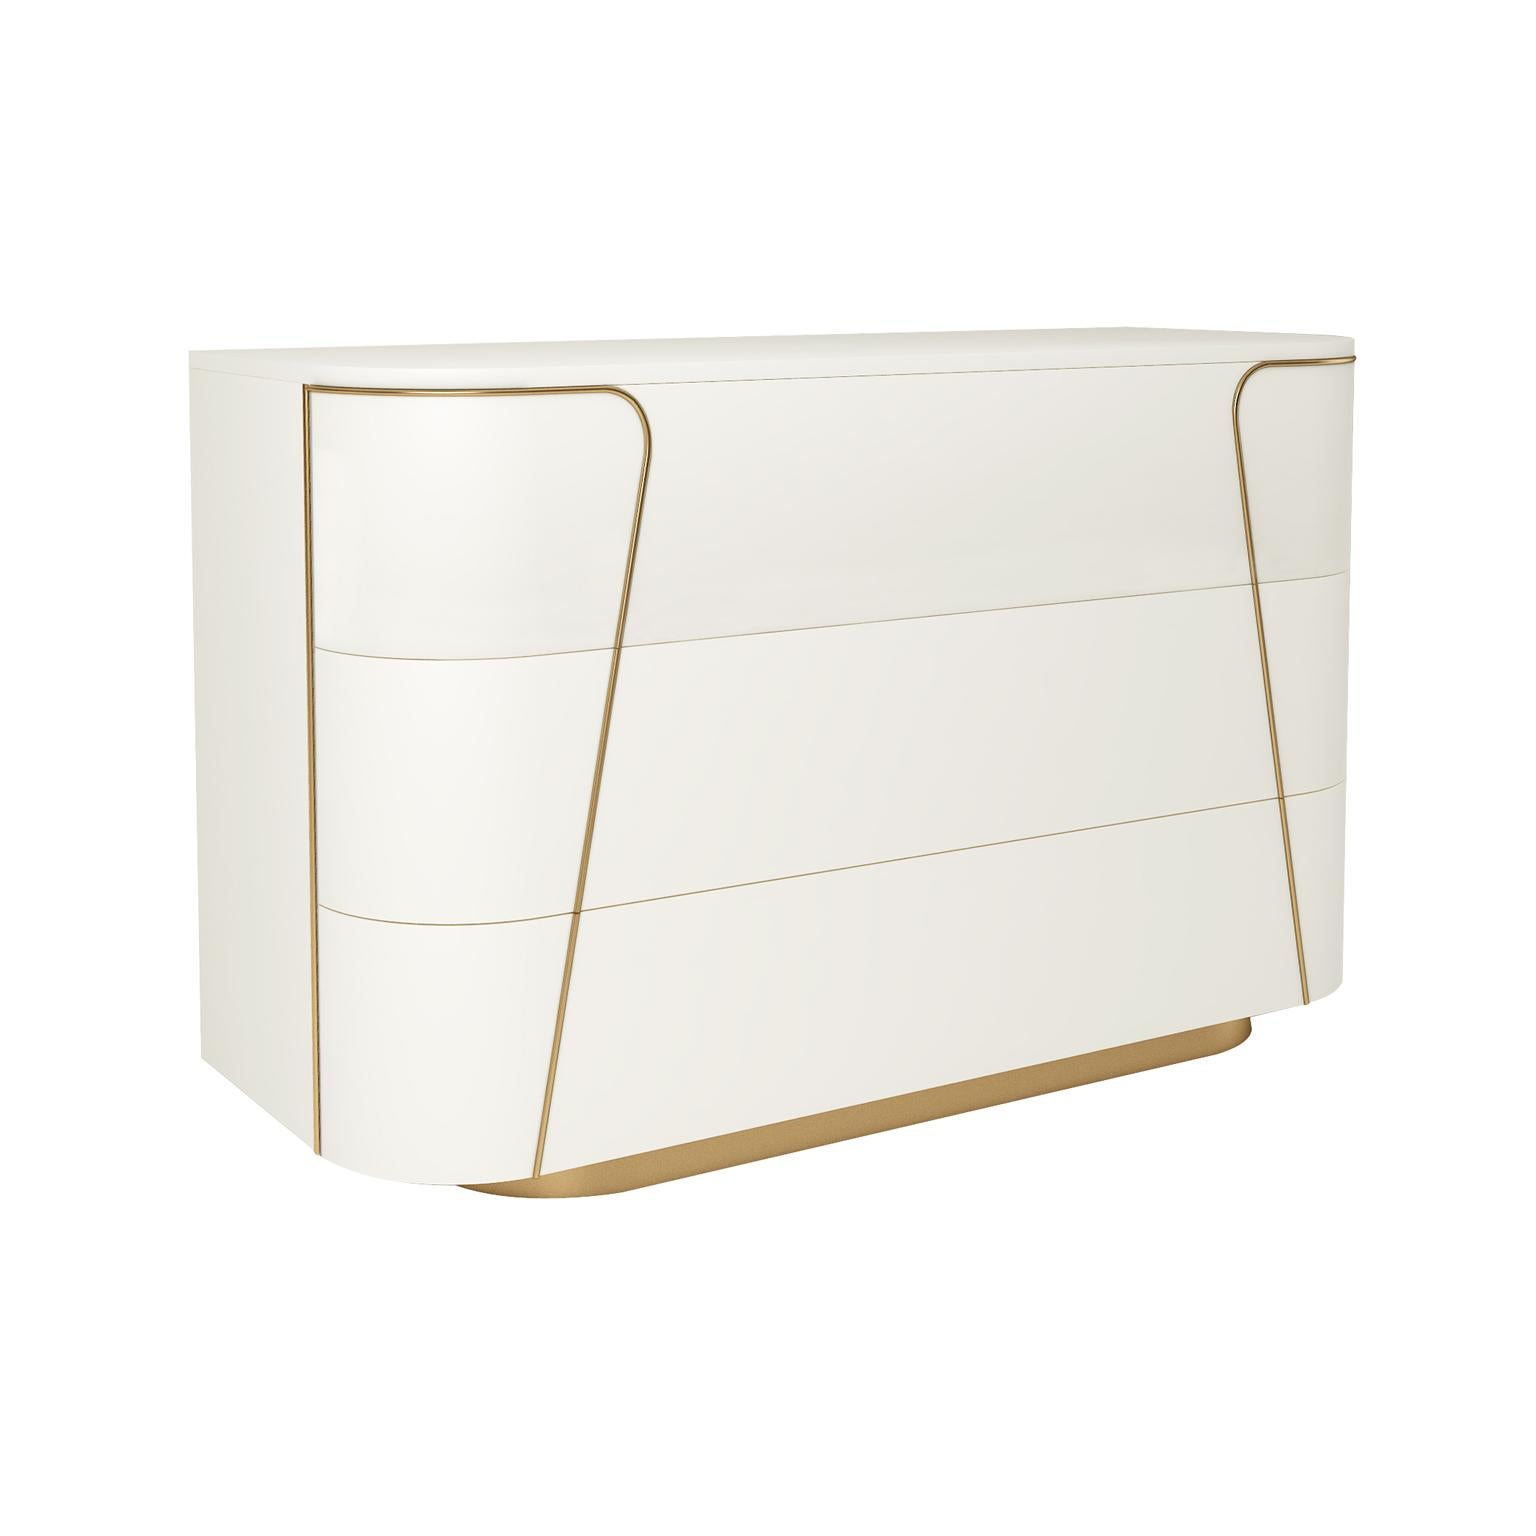 Designed by IC and realized by expert Italian artisans, the Gemma dresser features rounded corners and three large drawers. The sinuous lines are accented with brass or powder coated metal details. This contemporary functional design will bring